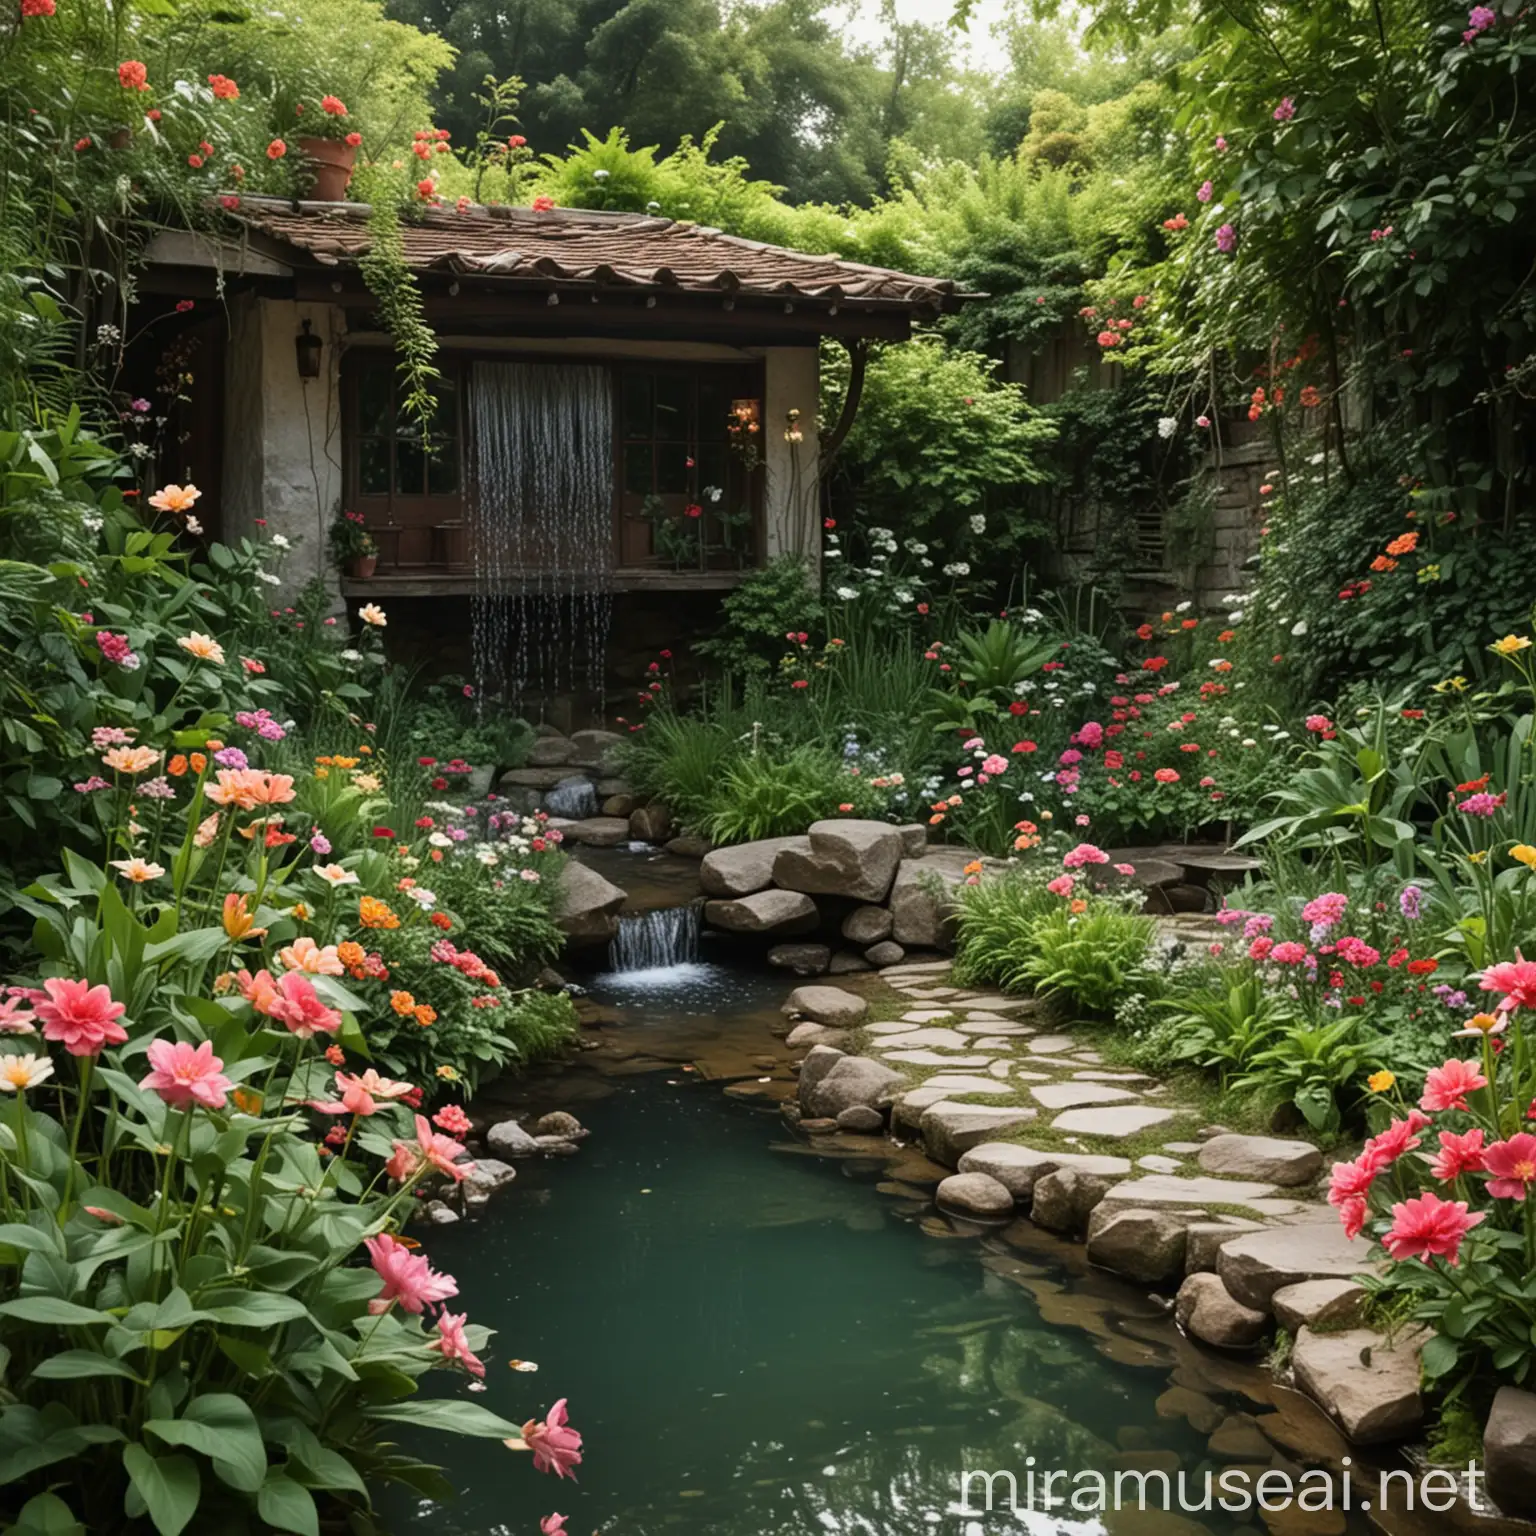 [5/29, 1:10 AM] Meta AI: Here's a suggested order for a viral TikTok relaxation video featuring greenery, flowers, an old-type house, and water:  *0s-3s:* Opening shot of a serene, old-type house surrounded by lush greenery and vibrant flowers.  *4s-6s:* Close-up of a gentle water stream or a small waterfall, creating a soothing sound.  *7s-10s:* Cut to a shot of a peaceful garden or courtyard, with a variety of colorful flowers and plants.  *11s-14s:* Focus on a specific flower or plant, highlighting its beauty and details.  *15s-18s:* Show a gentle breeze rustling the leaves or petals, creating a calming effect.  *19s-22s:* Cut to a shot of the old-type house, with a focus on its rustic charm and character.  *23s-26s:* Show a peaceful corner or nook, with a comfortable seating area and lush greenery.  *27s-30s:* End with a shot of the serene surroundings, with a gentle fade-out.  *Hashtags:* 